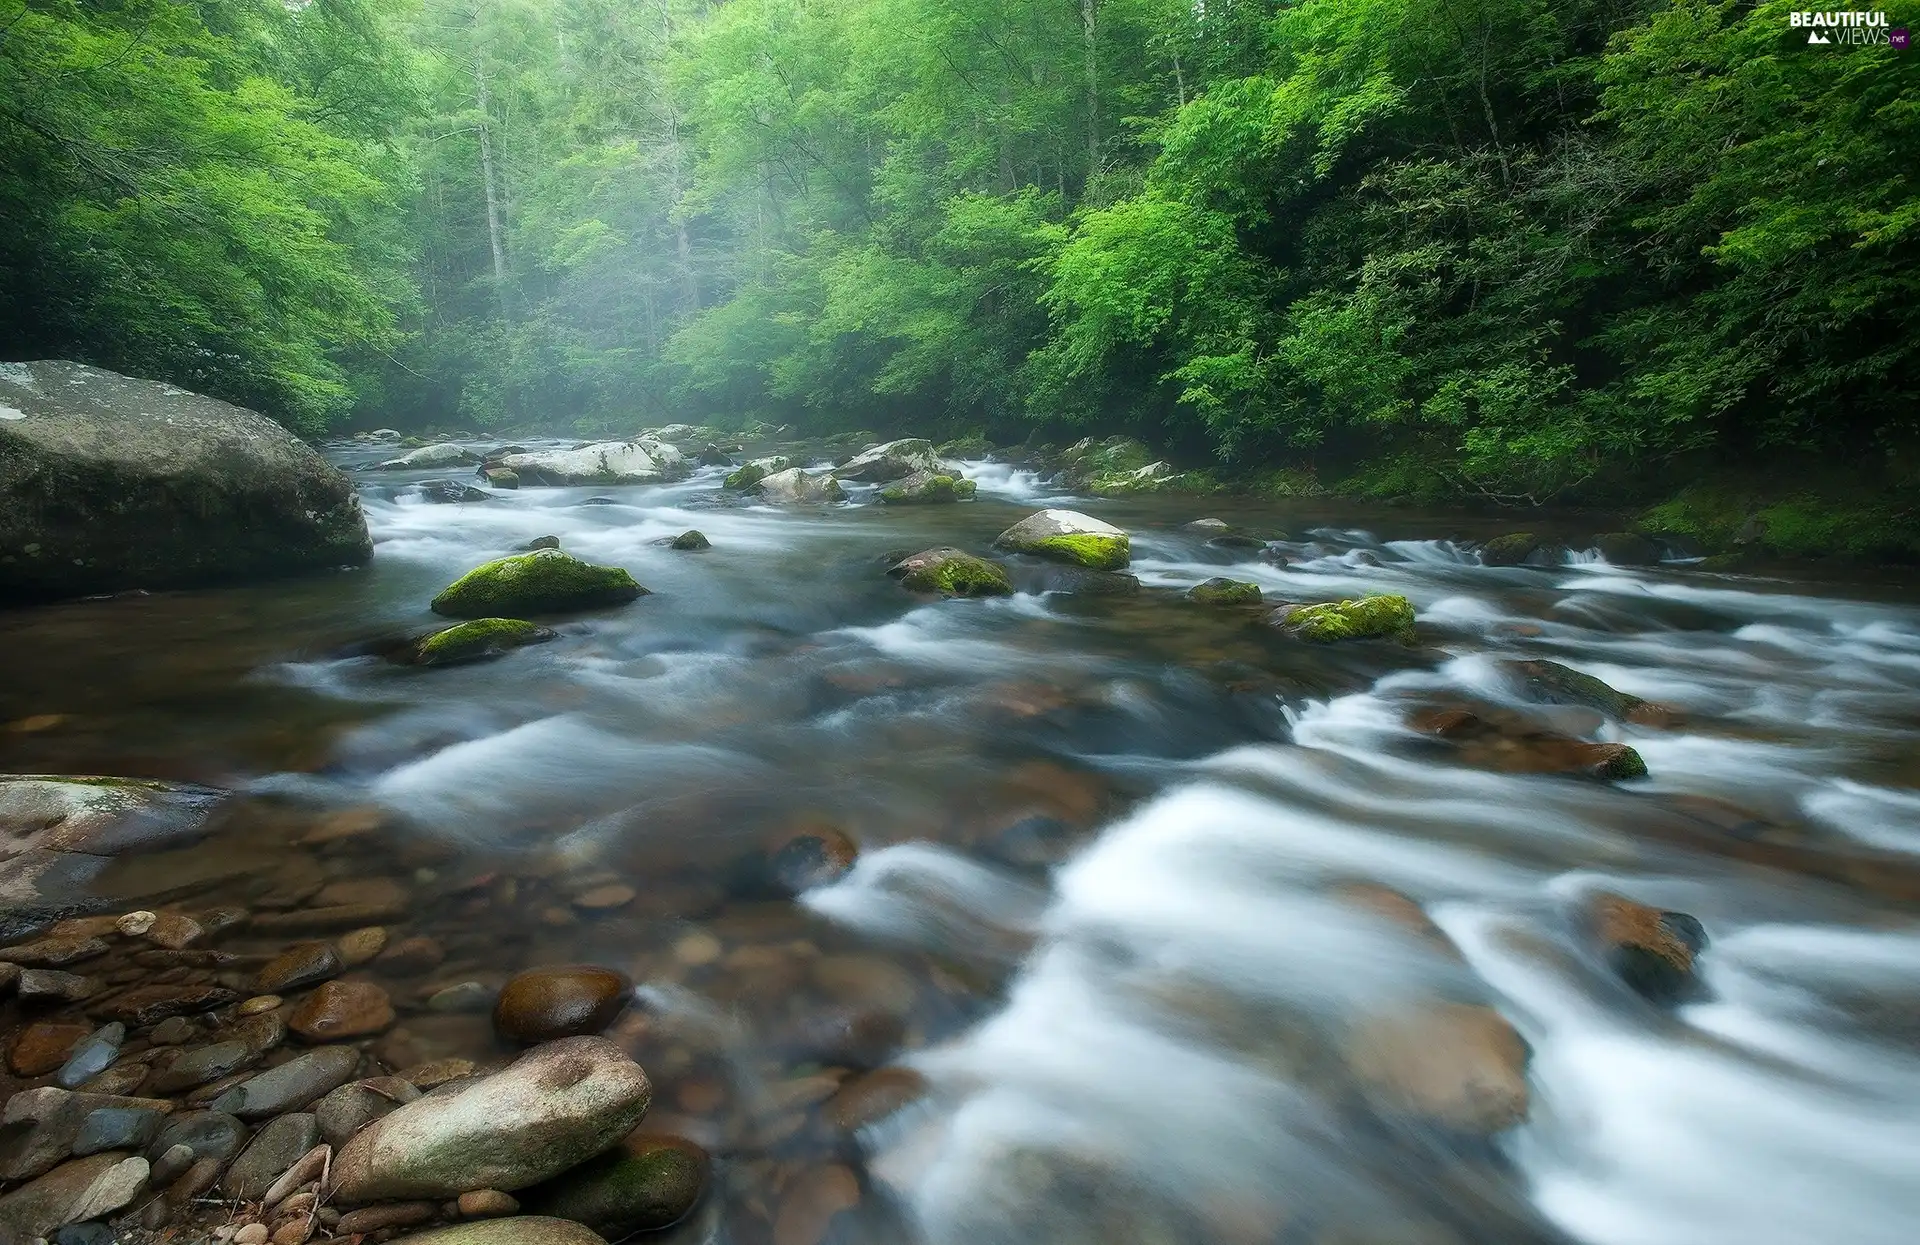 Tennessee State, The United States, forest, Stones, viewes, Great Smoky Mountains National Park, Little River, trees